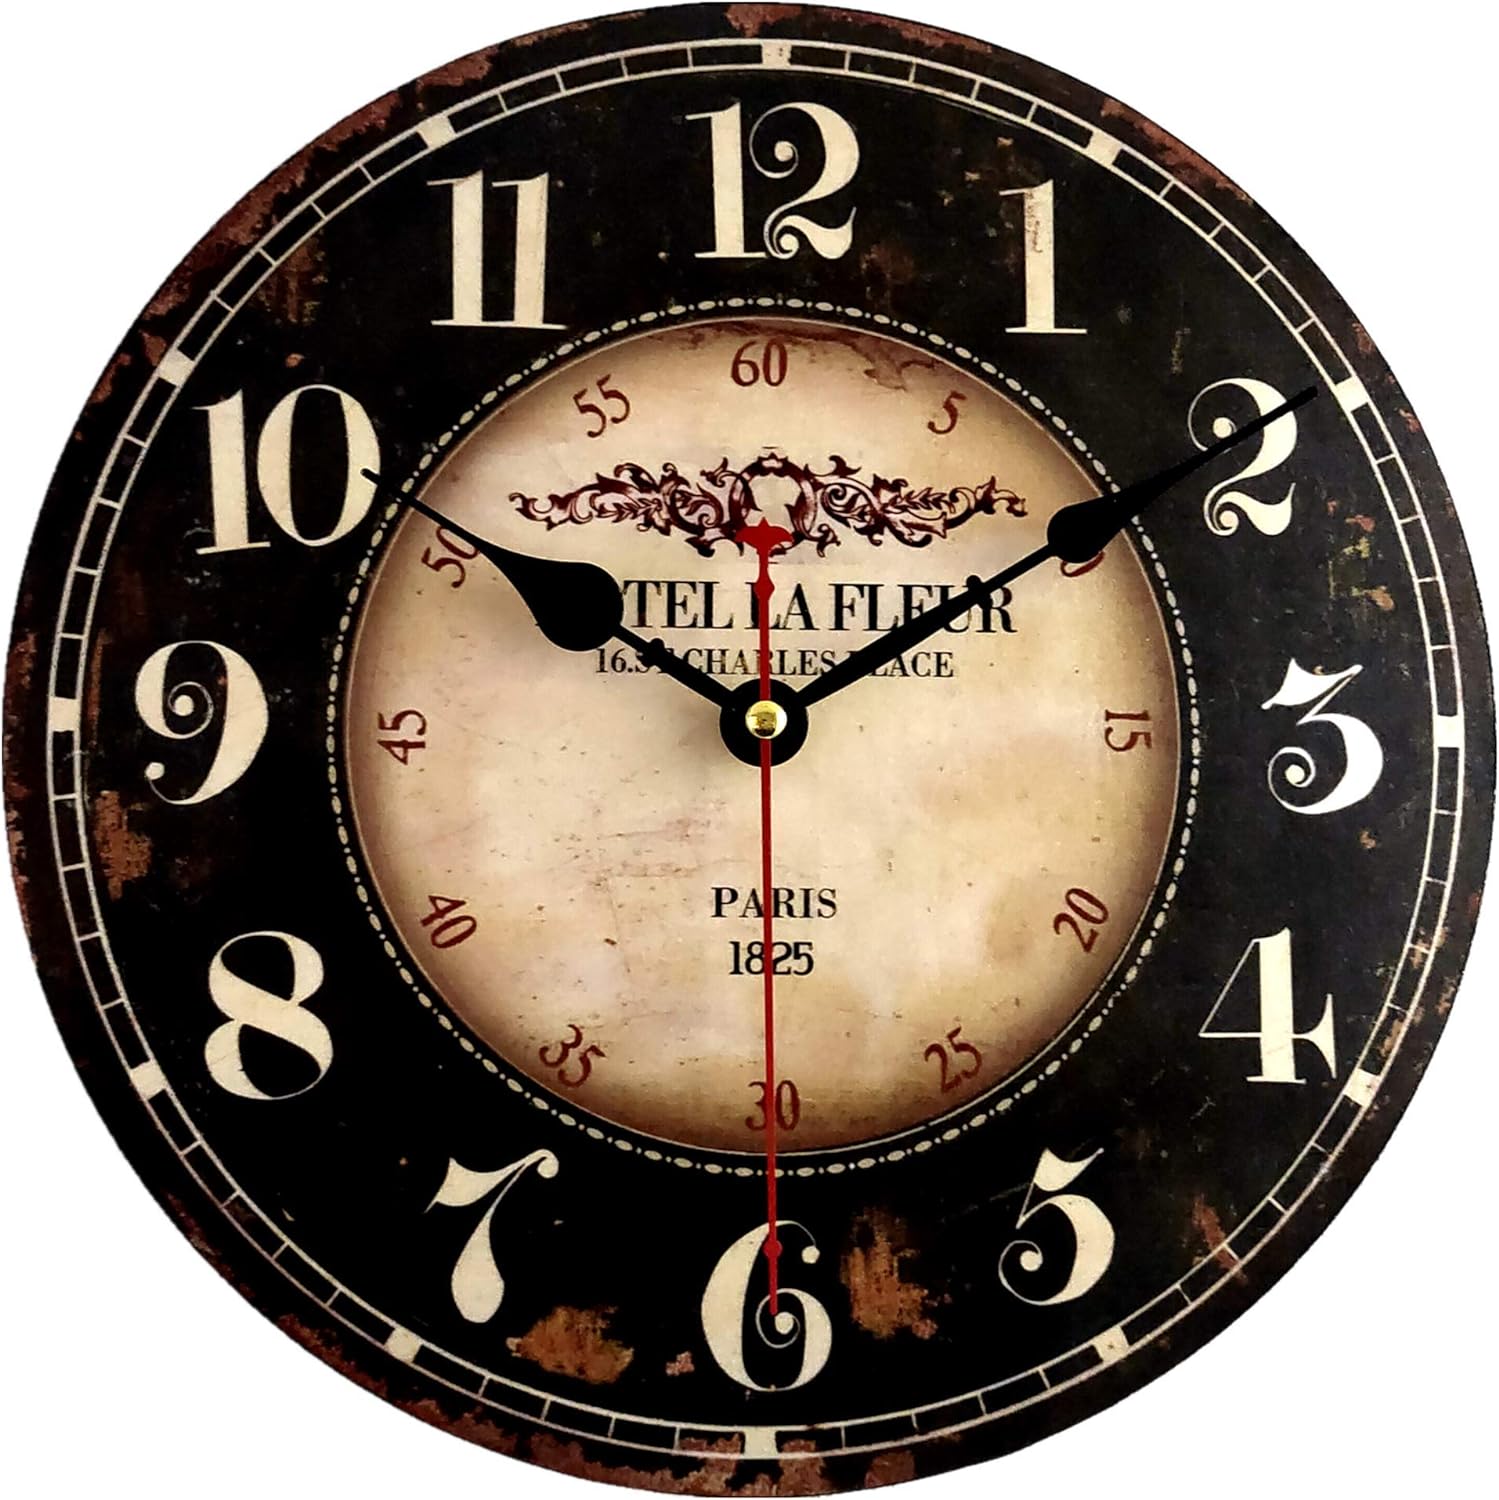 by Unbranded Wooden Wall Clock 12 Inch Battery Operated Wall Living Room Kitchen Bedroom Office Vintage Home Baby Room Sweet Dreams Newborn Twinkle Twinkle Little Star